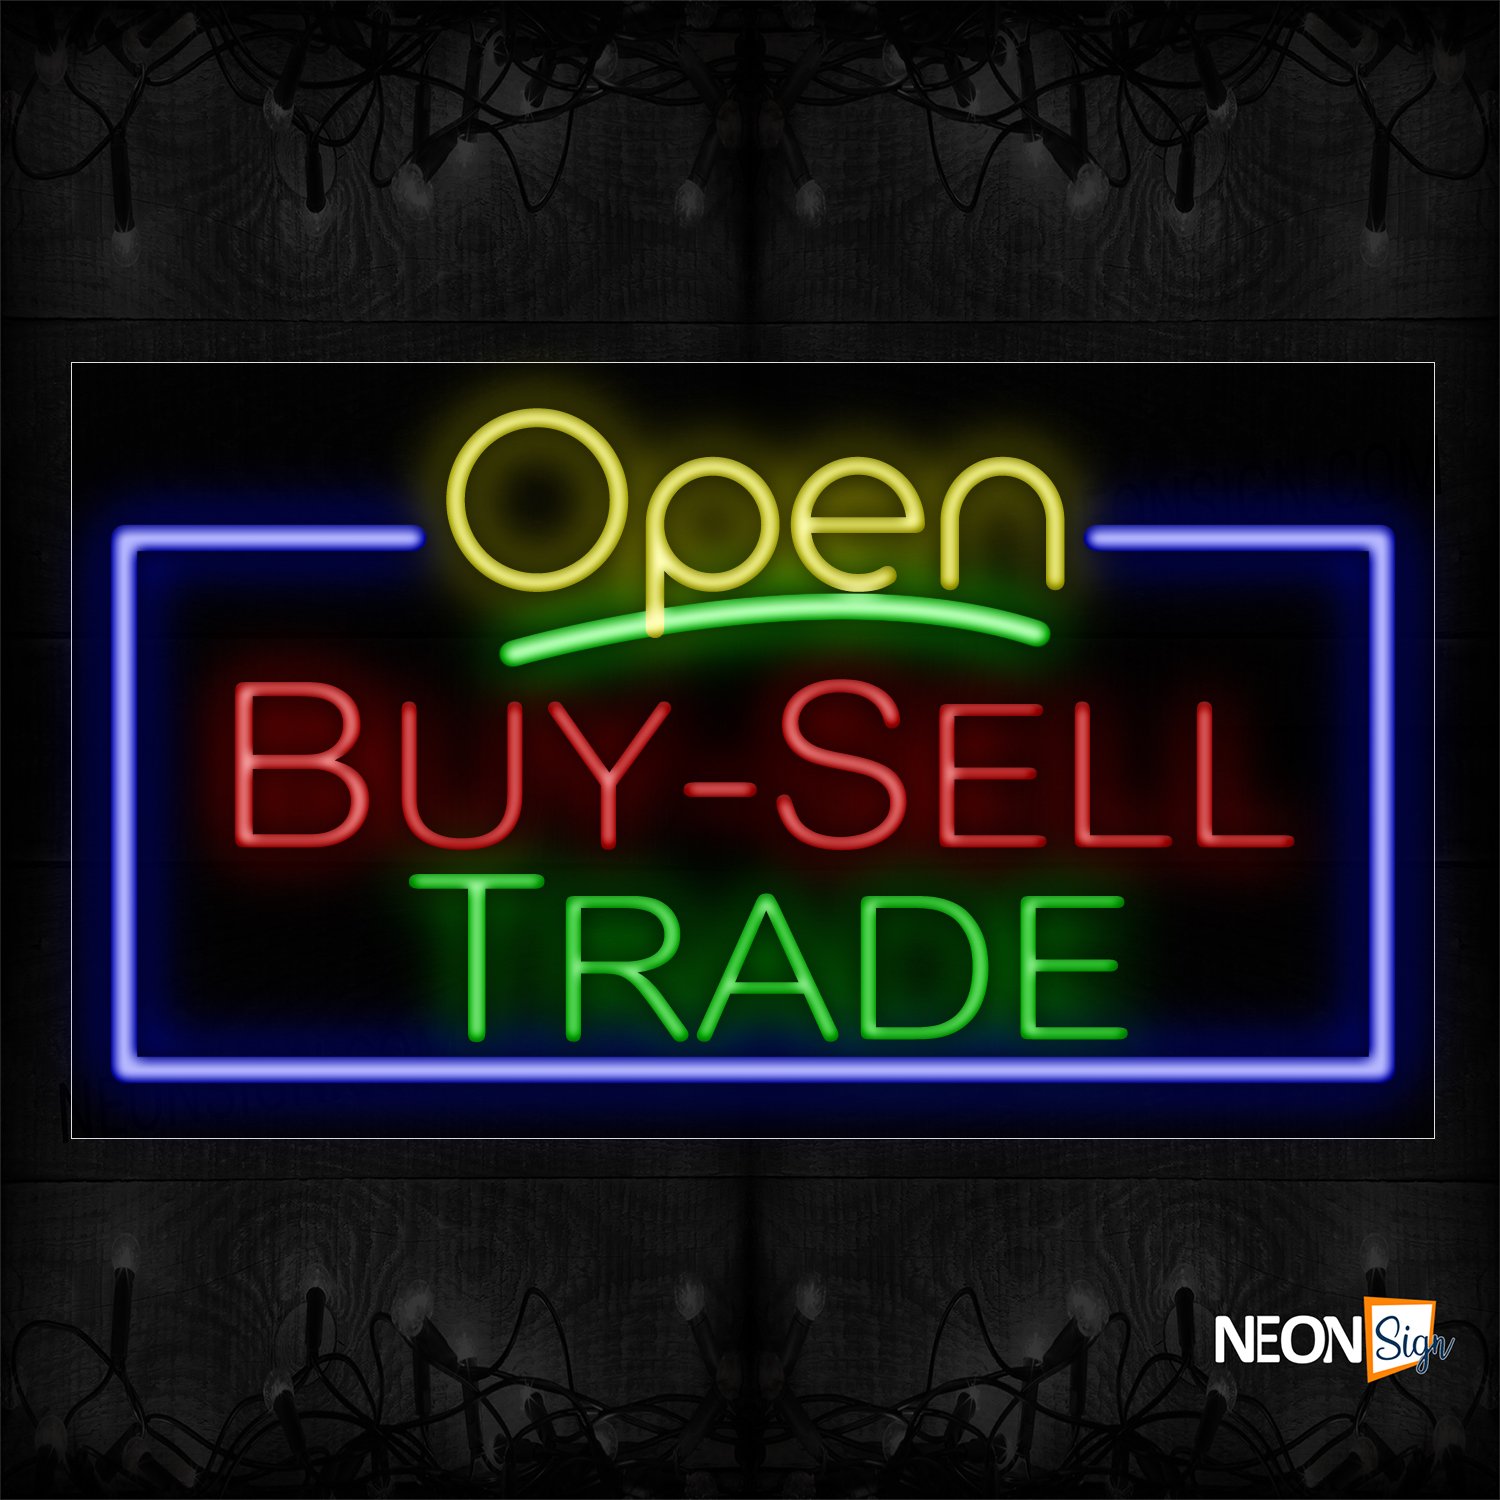 Image of 15474 Open By-sell Trade with blue border Neon Signs_20x37 Black Backing